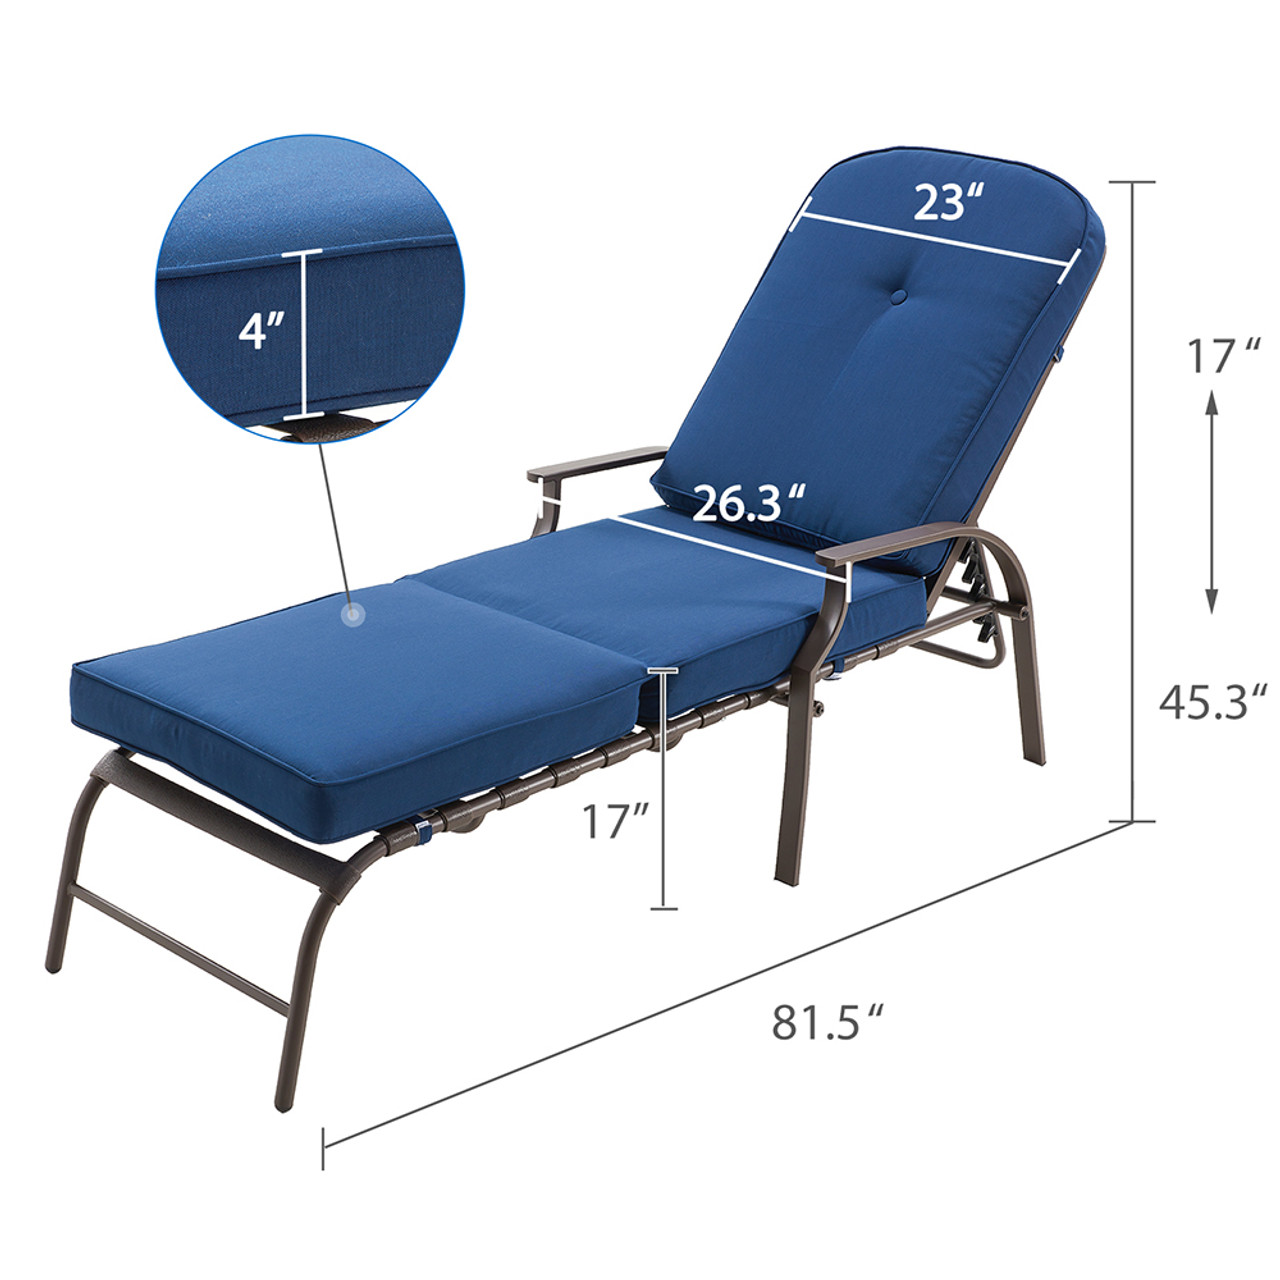 Adjustable Outdoor Patio Chaise Lounge Chair  product image